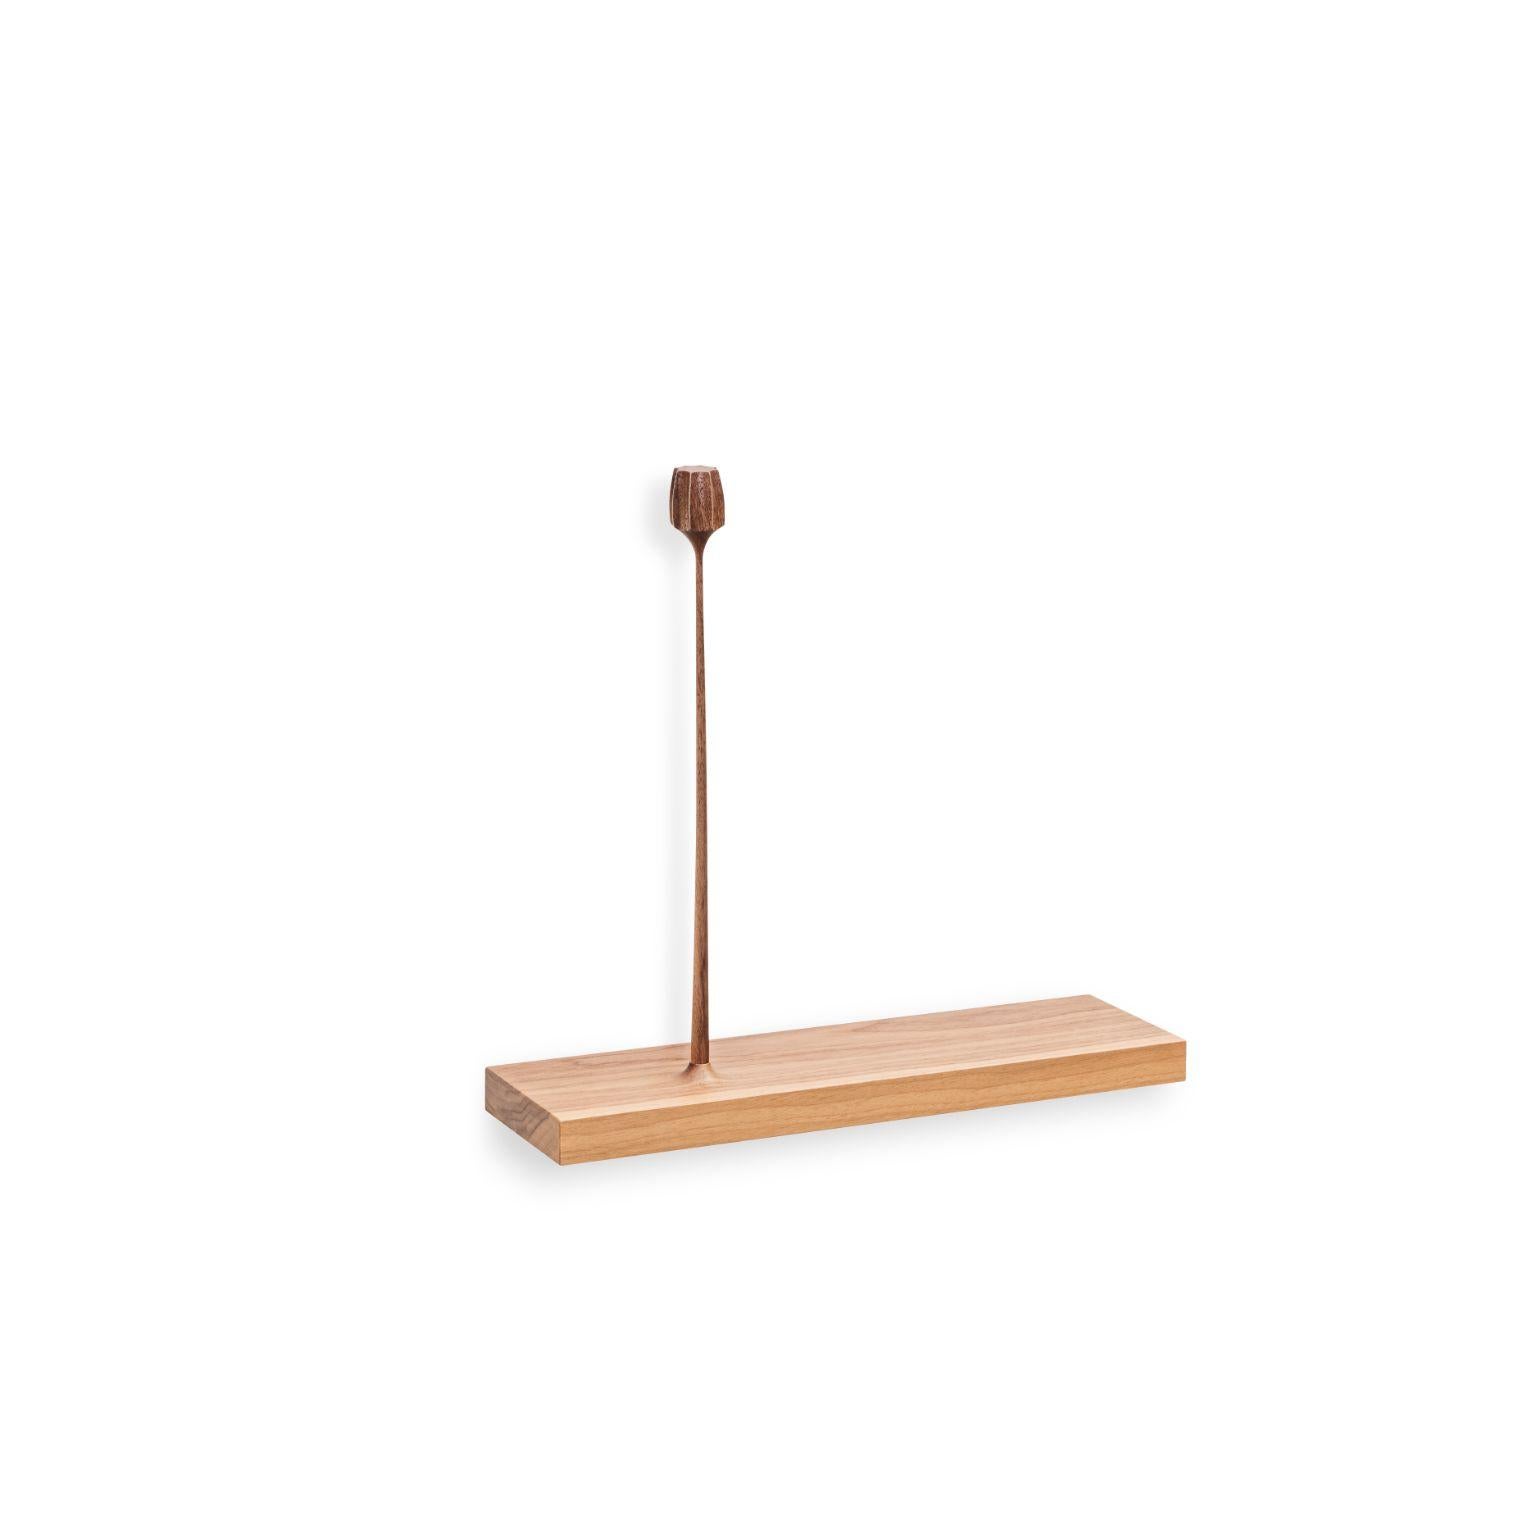 Kukkii sculpture - 1 flower - light by Antrei Hartikainen
Materials: Black stained oak, natural oil waxed walnut
Dimensions: W 75 / 60 / 40 cm, D 10 cm, H 34 / 42 cm

Also available: dark color & different flower amounts 

Kukkii (blooms) is a